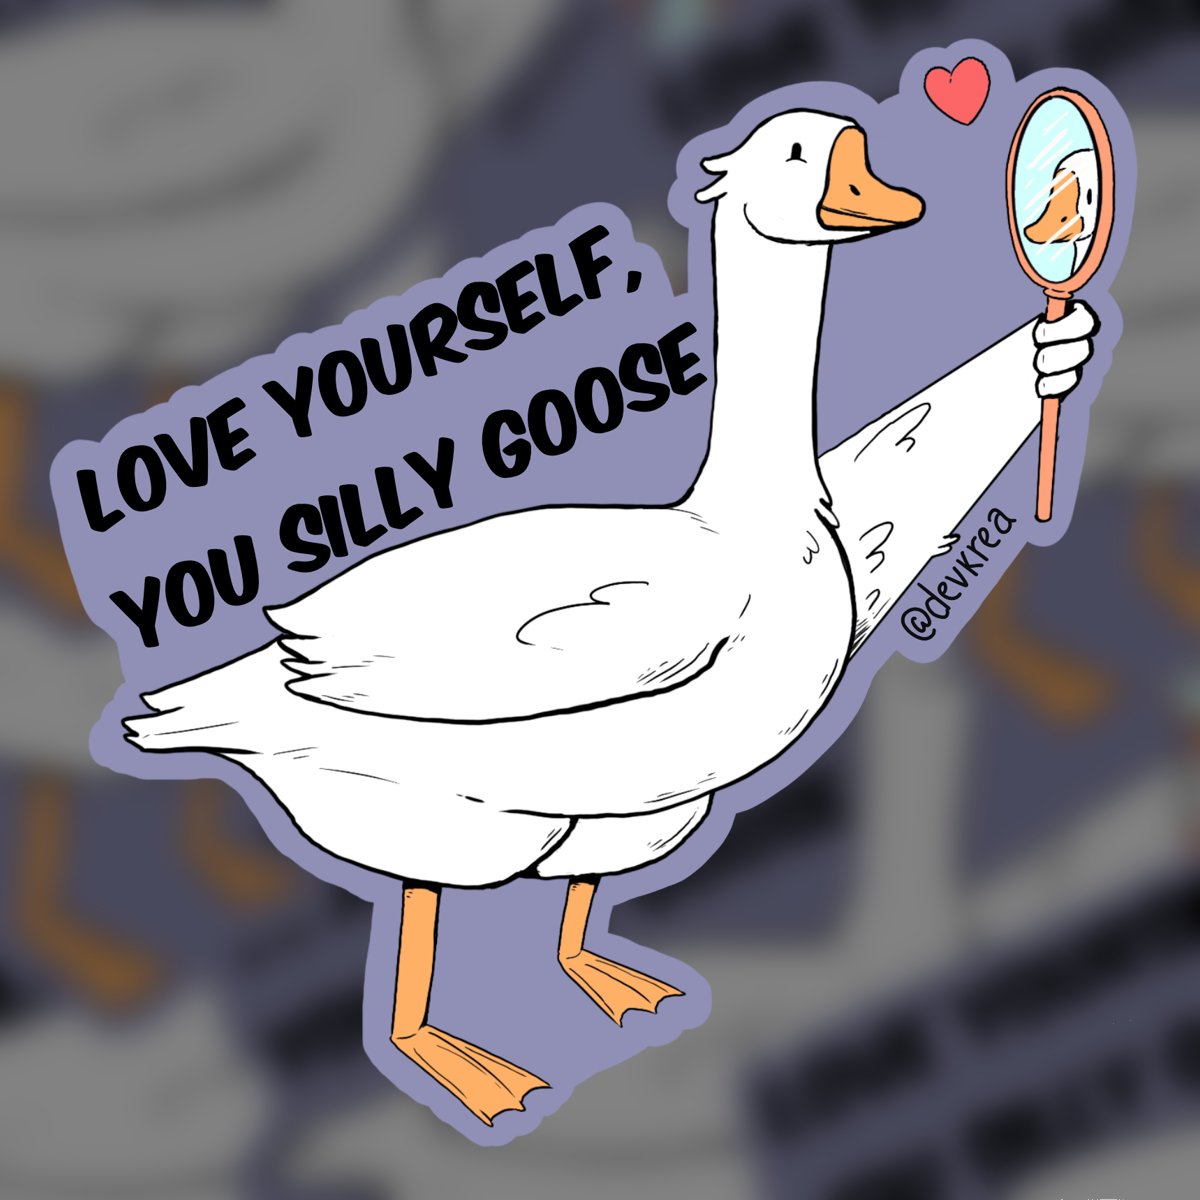 Silly Goose 3" | Deviant Kreations - Deviantkreations